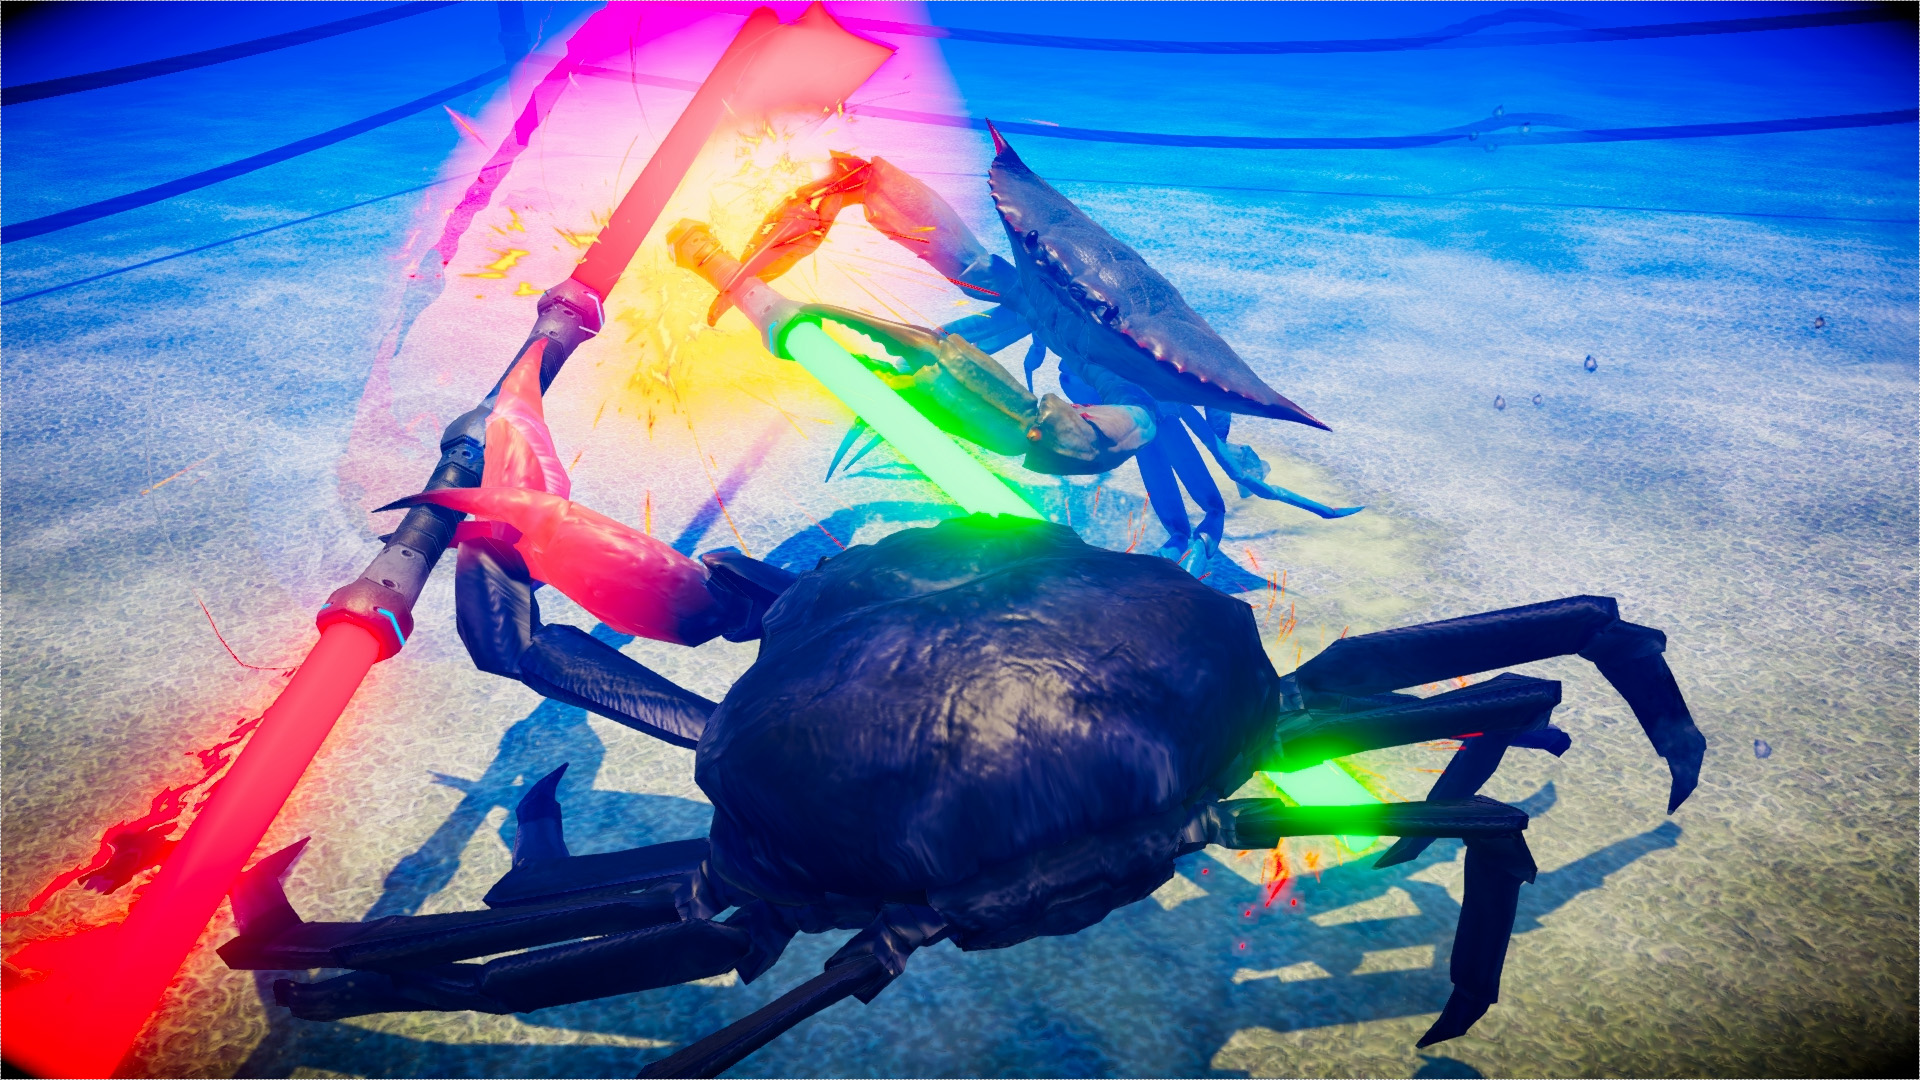 Crabs With Lightsabers?